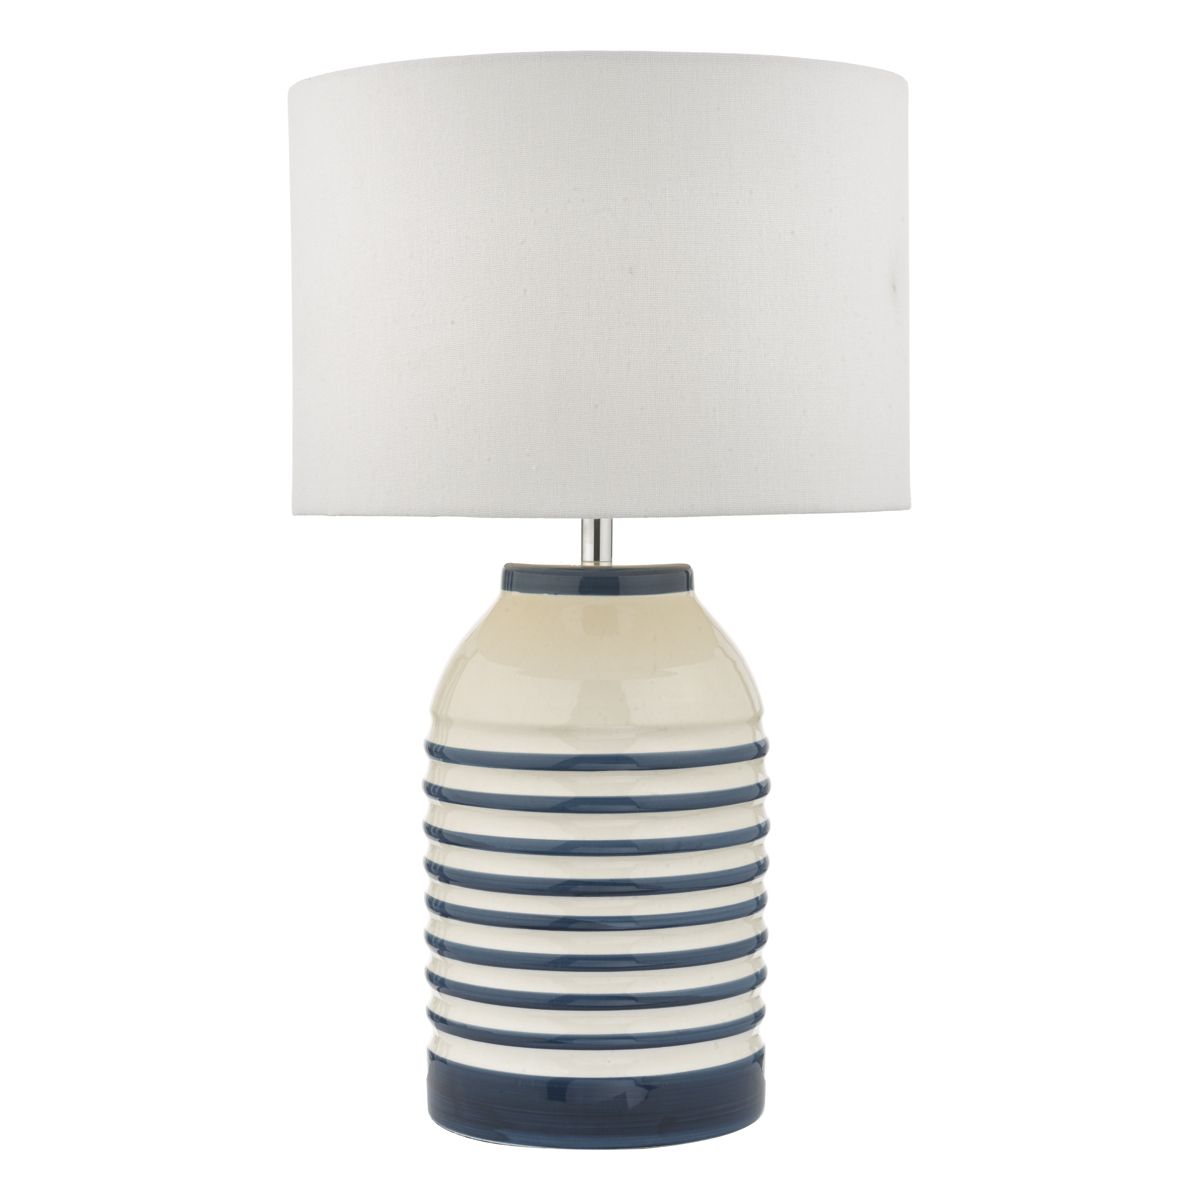 Zabe Table Lamp White and Blue C/W Shade